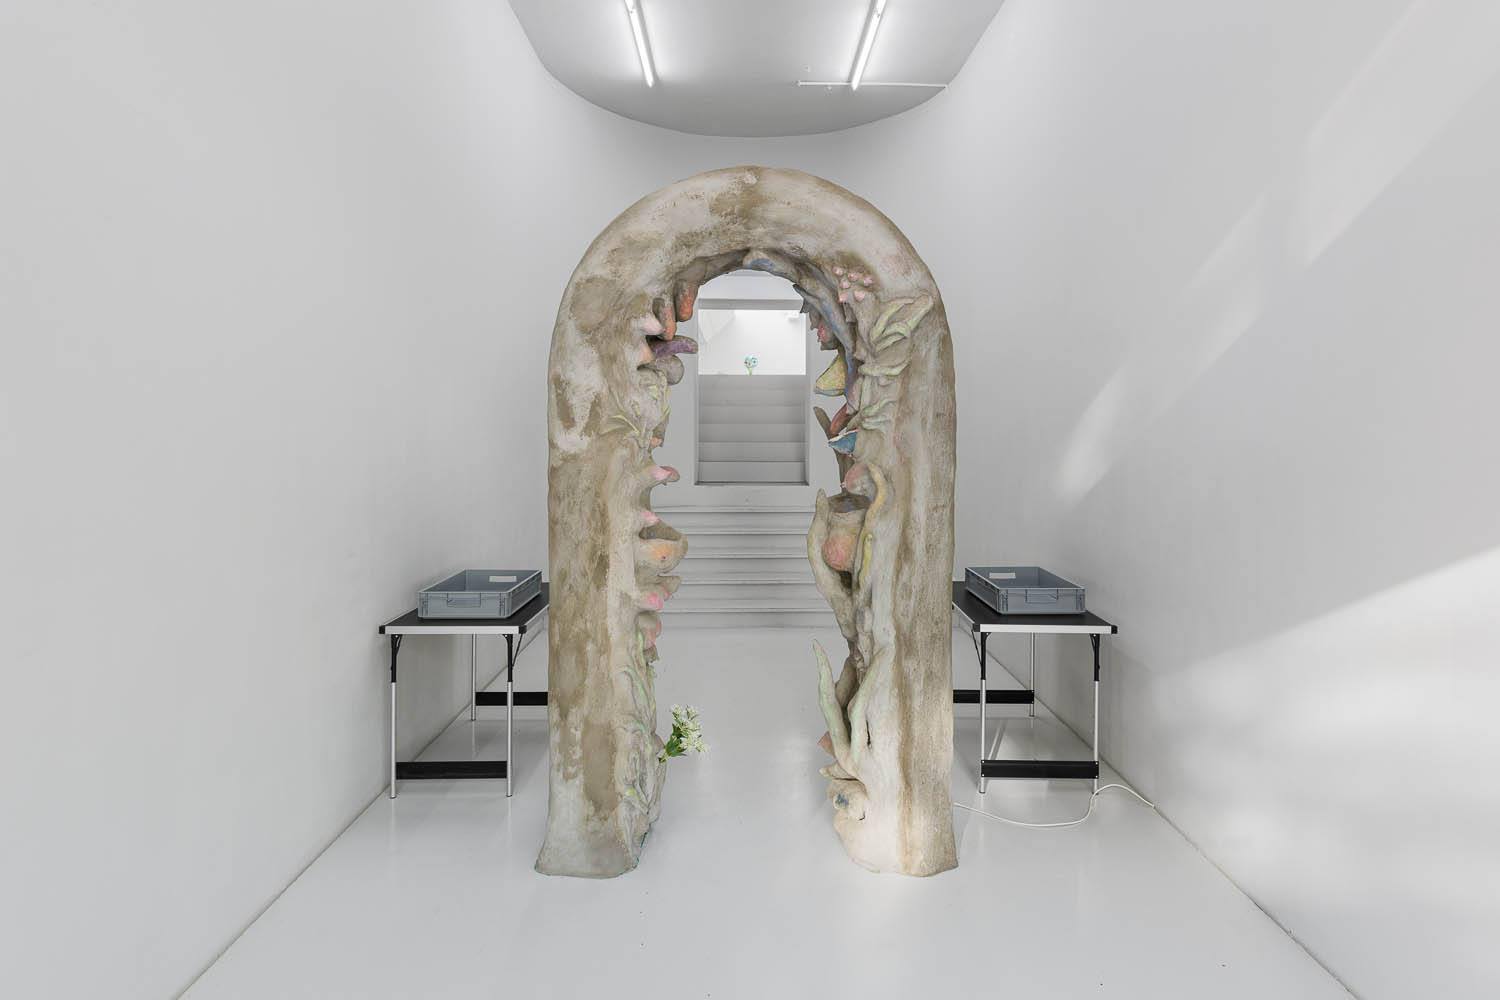 Laure Prouvost, Security Gate, 2019, wood and metal construction with concrete surface, acrylic, tapestry, motion sensor with sound, 250 x 135 x 45 cm, unique